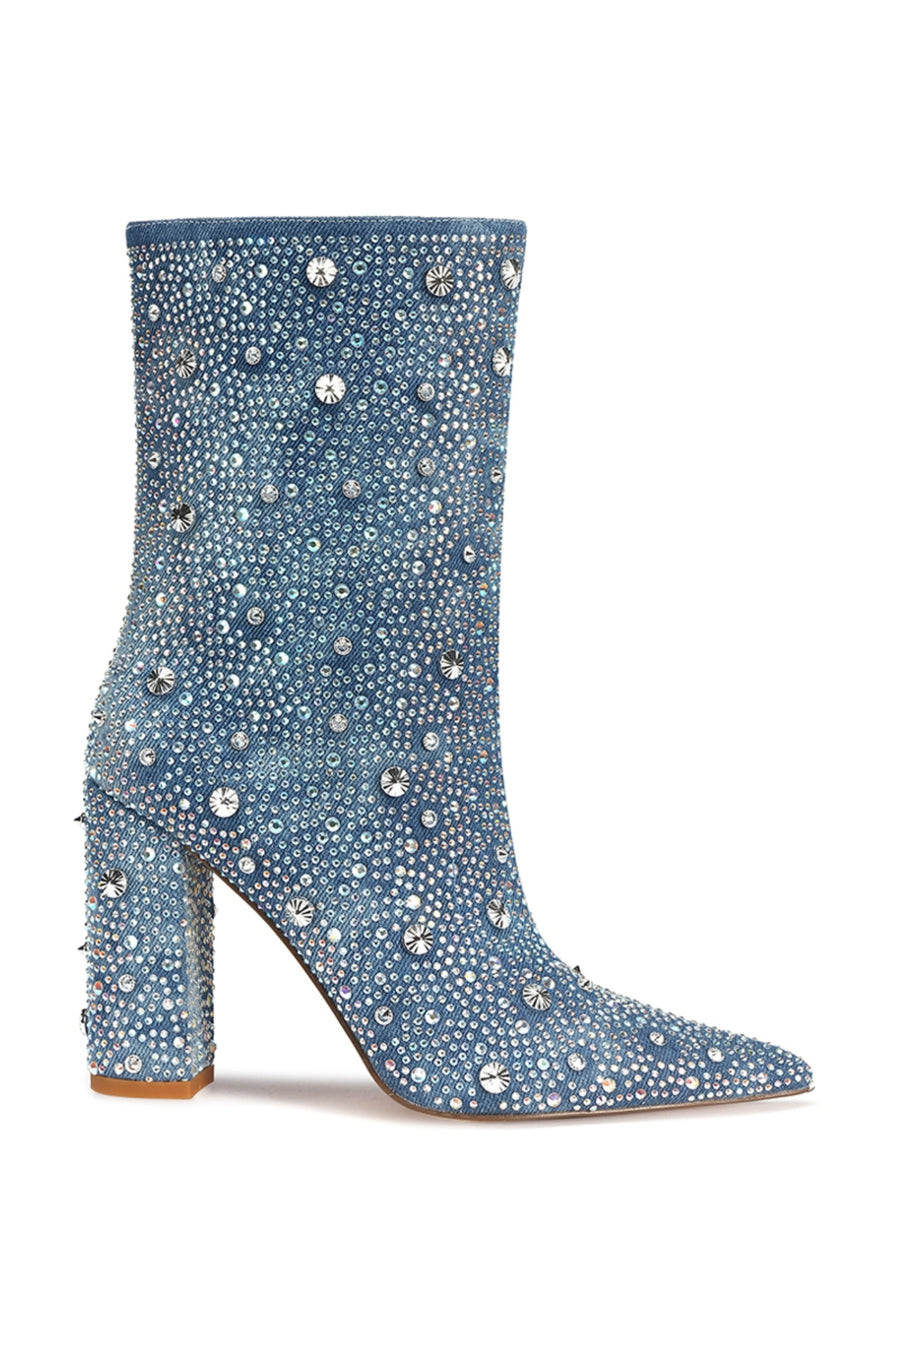 denim ankle bootie with a pointed toe, block heel, and rhinestone embellishments